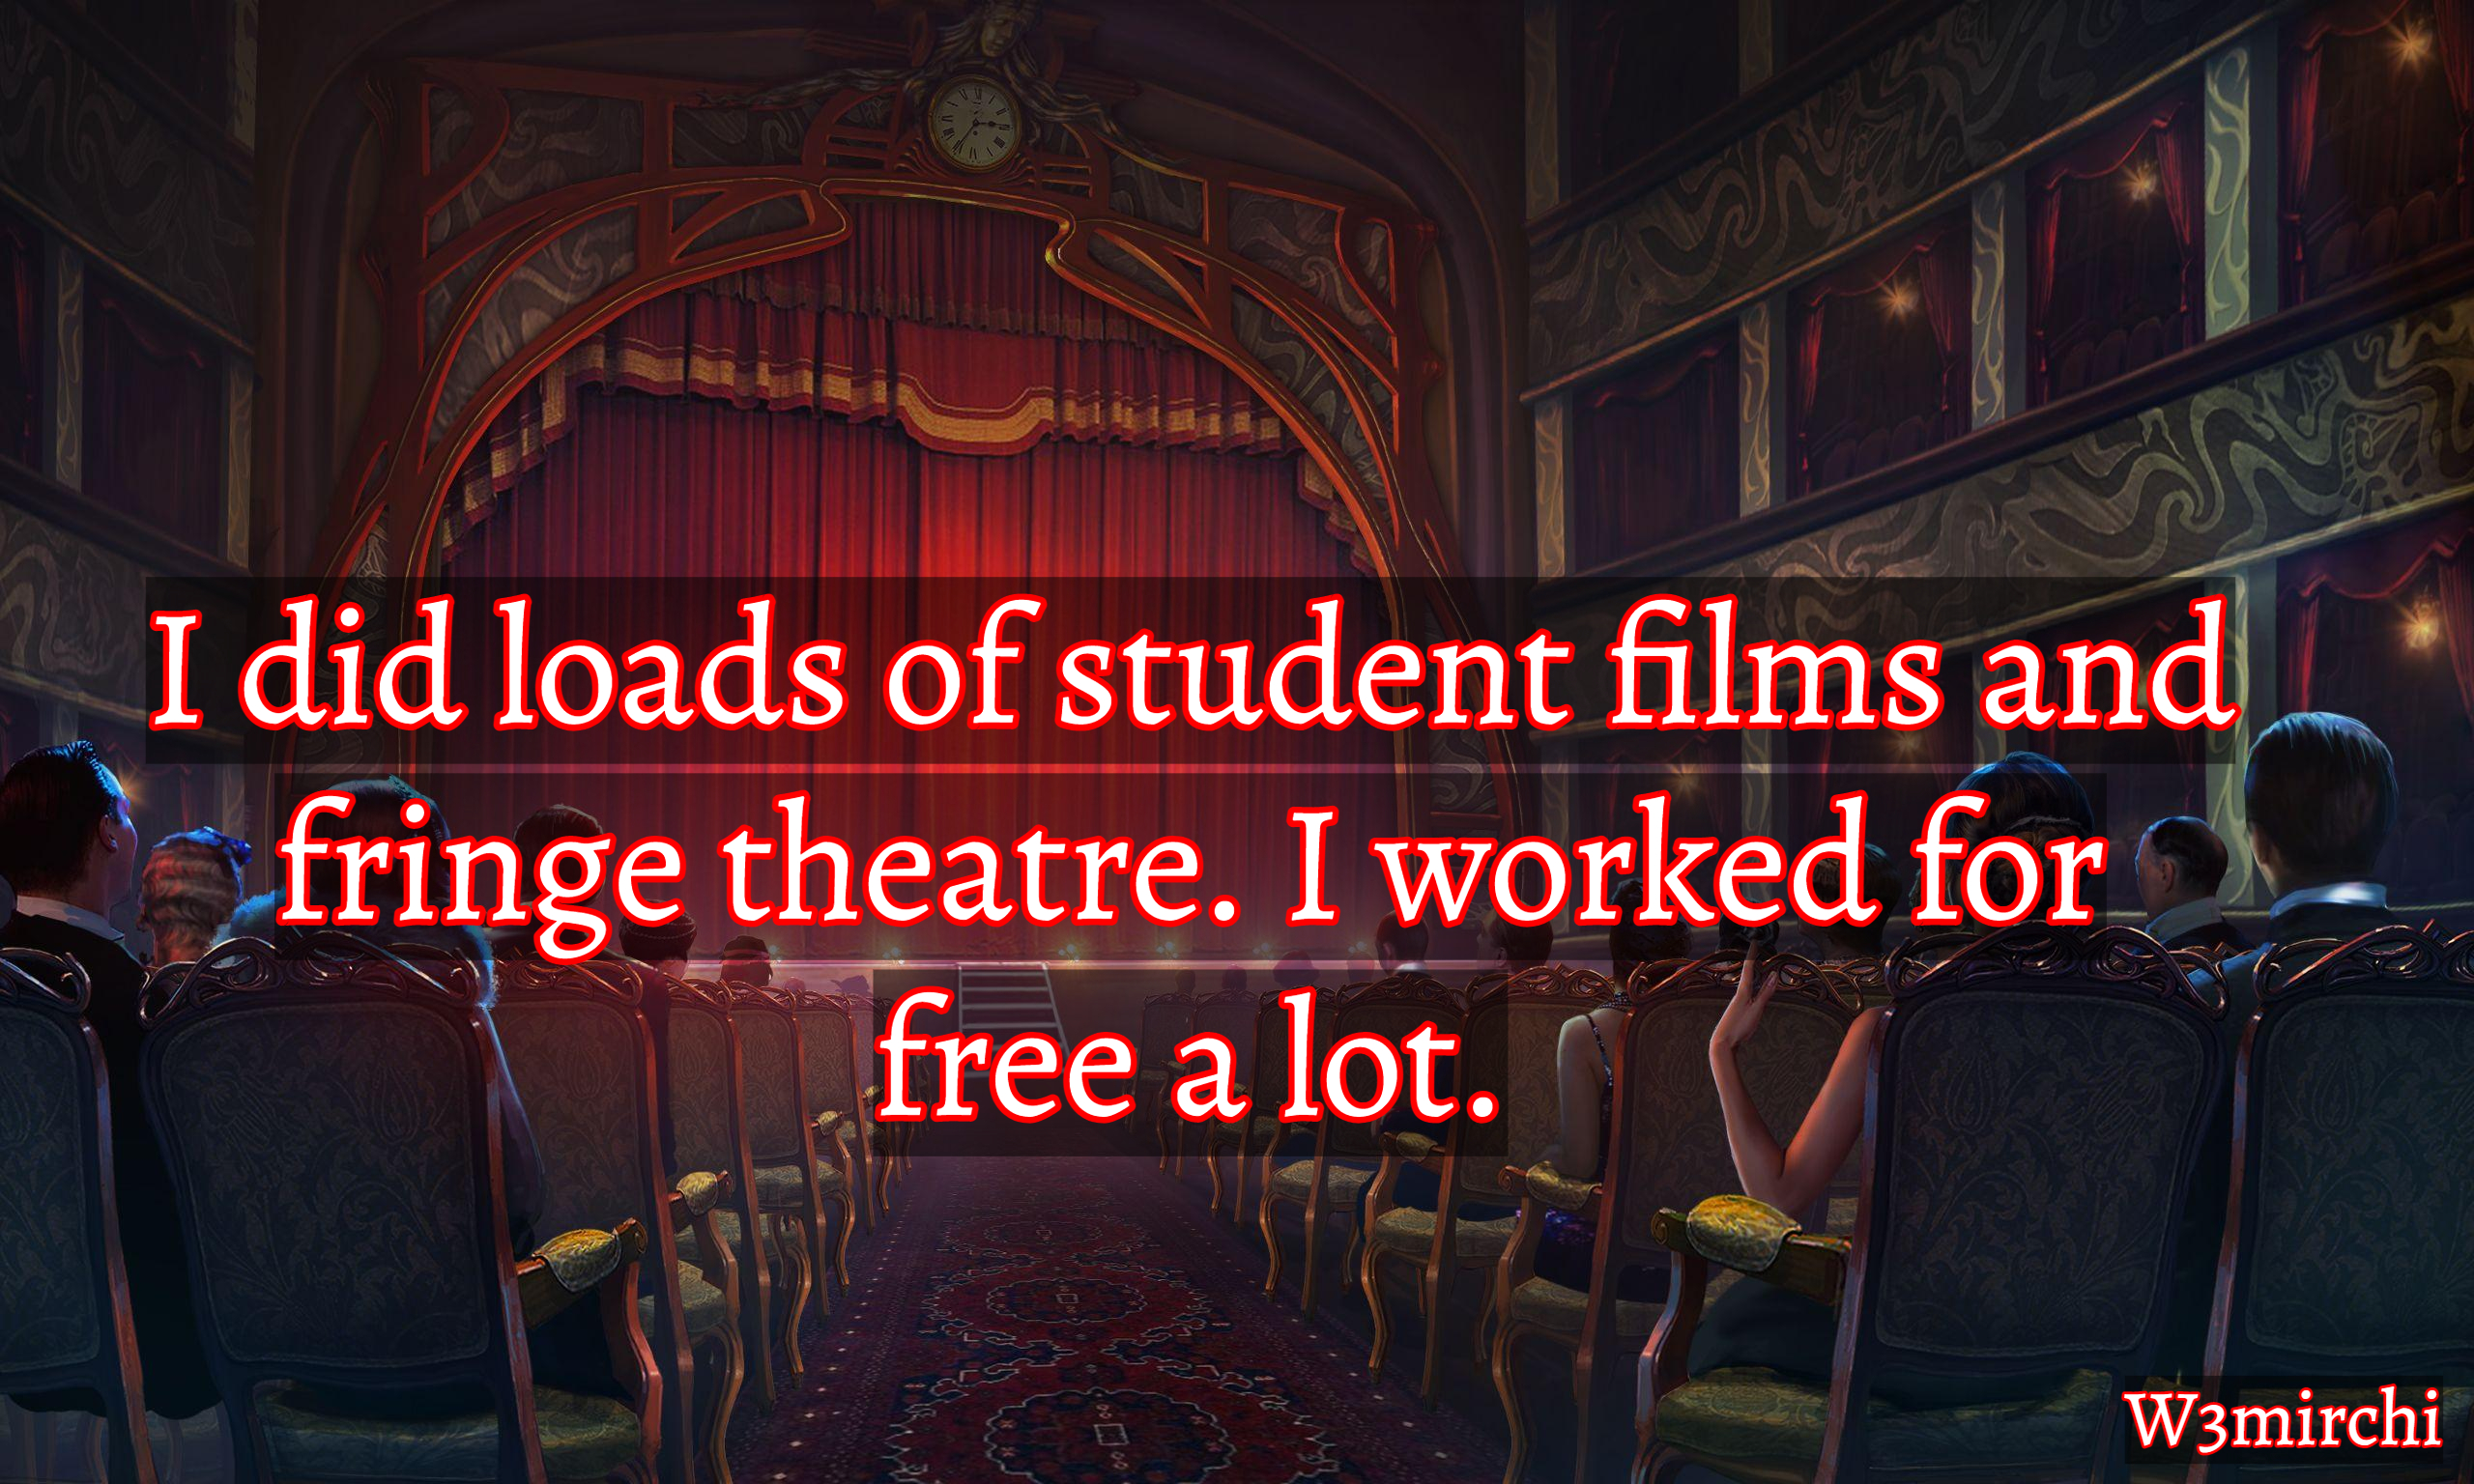 Theatre Quotes For students